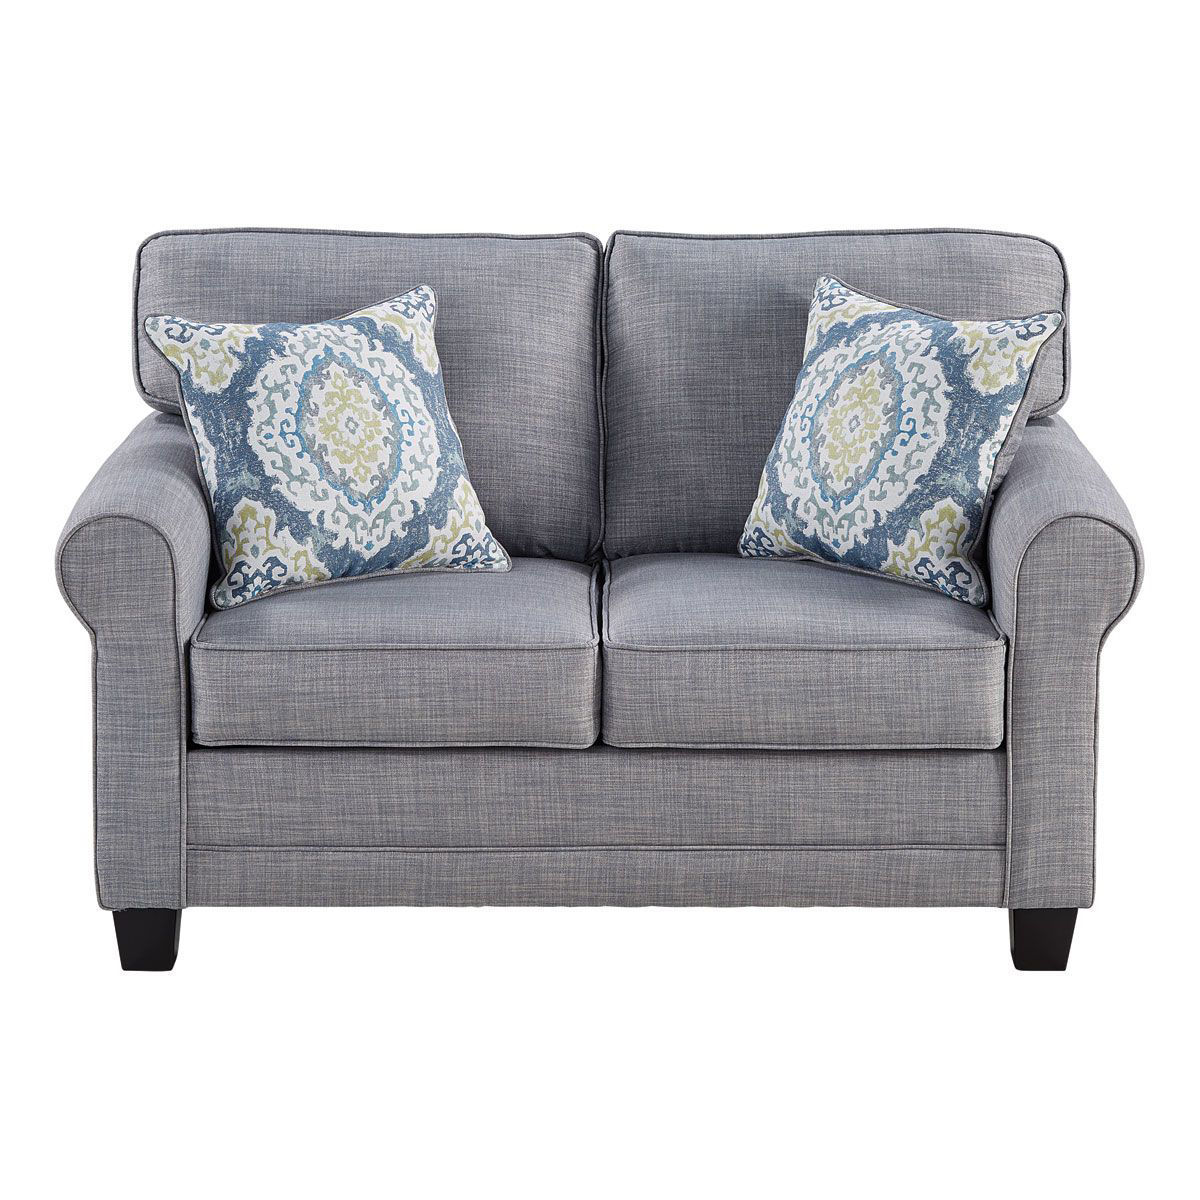 Hayes Loveseat | Badcock Furniture Home &more